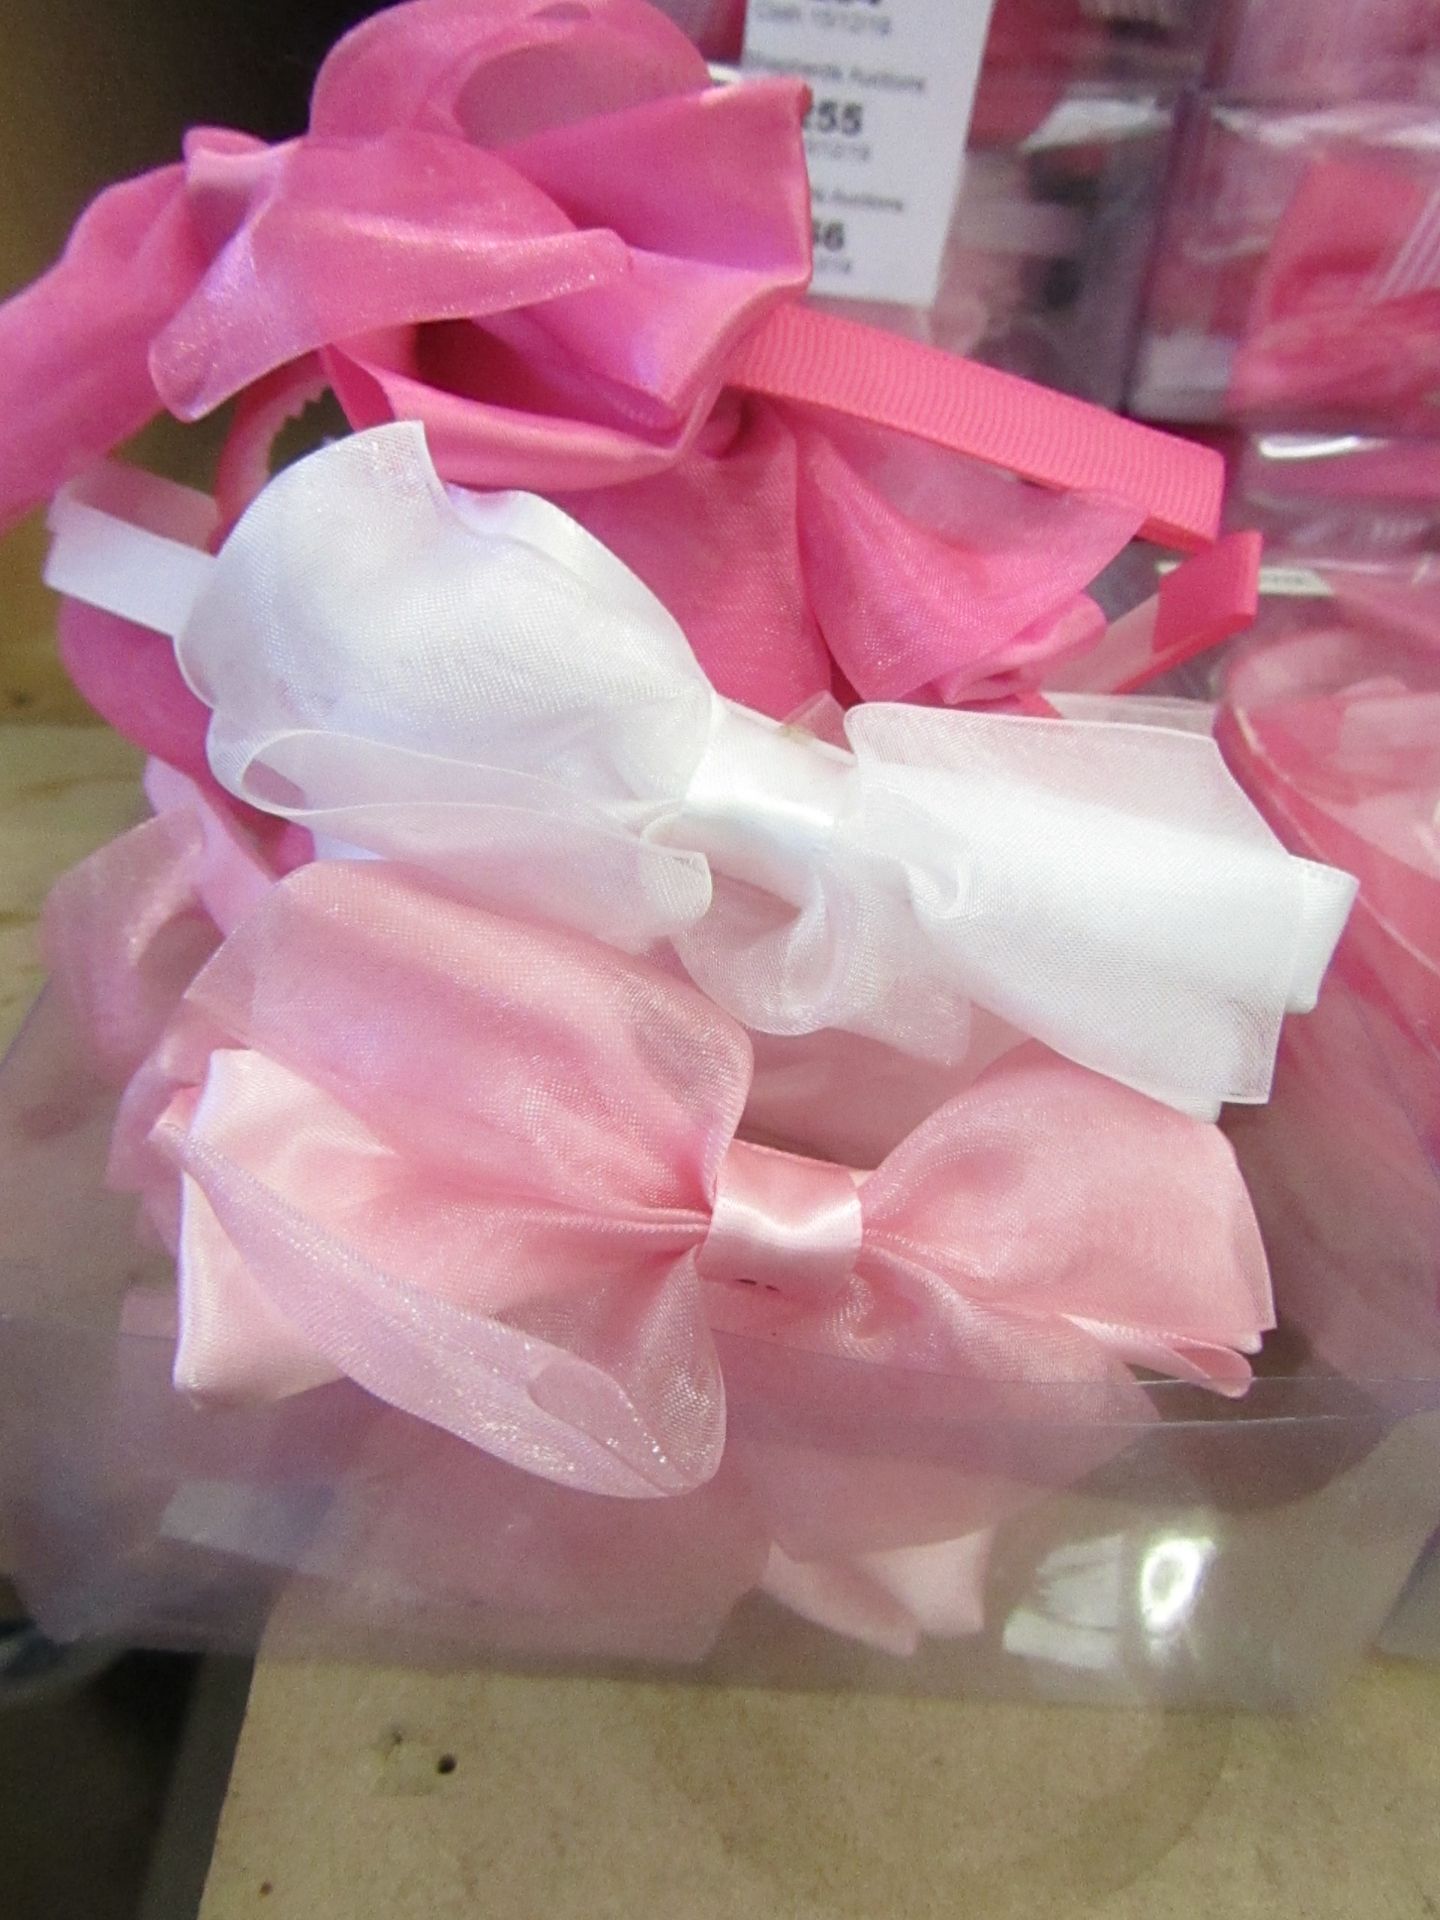 12 x various Coloured Bow Headbands similar product is RRP £3.50 each @ Claires Accessories